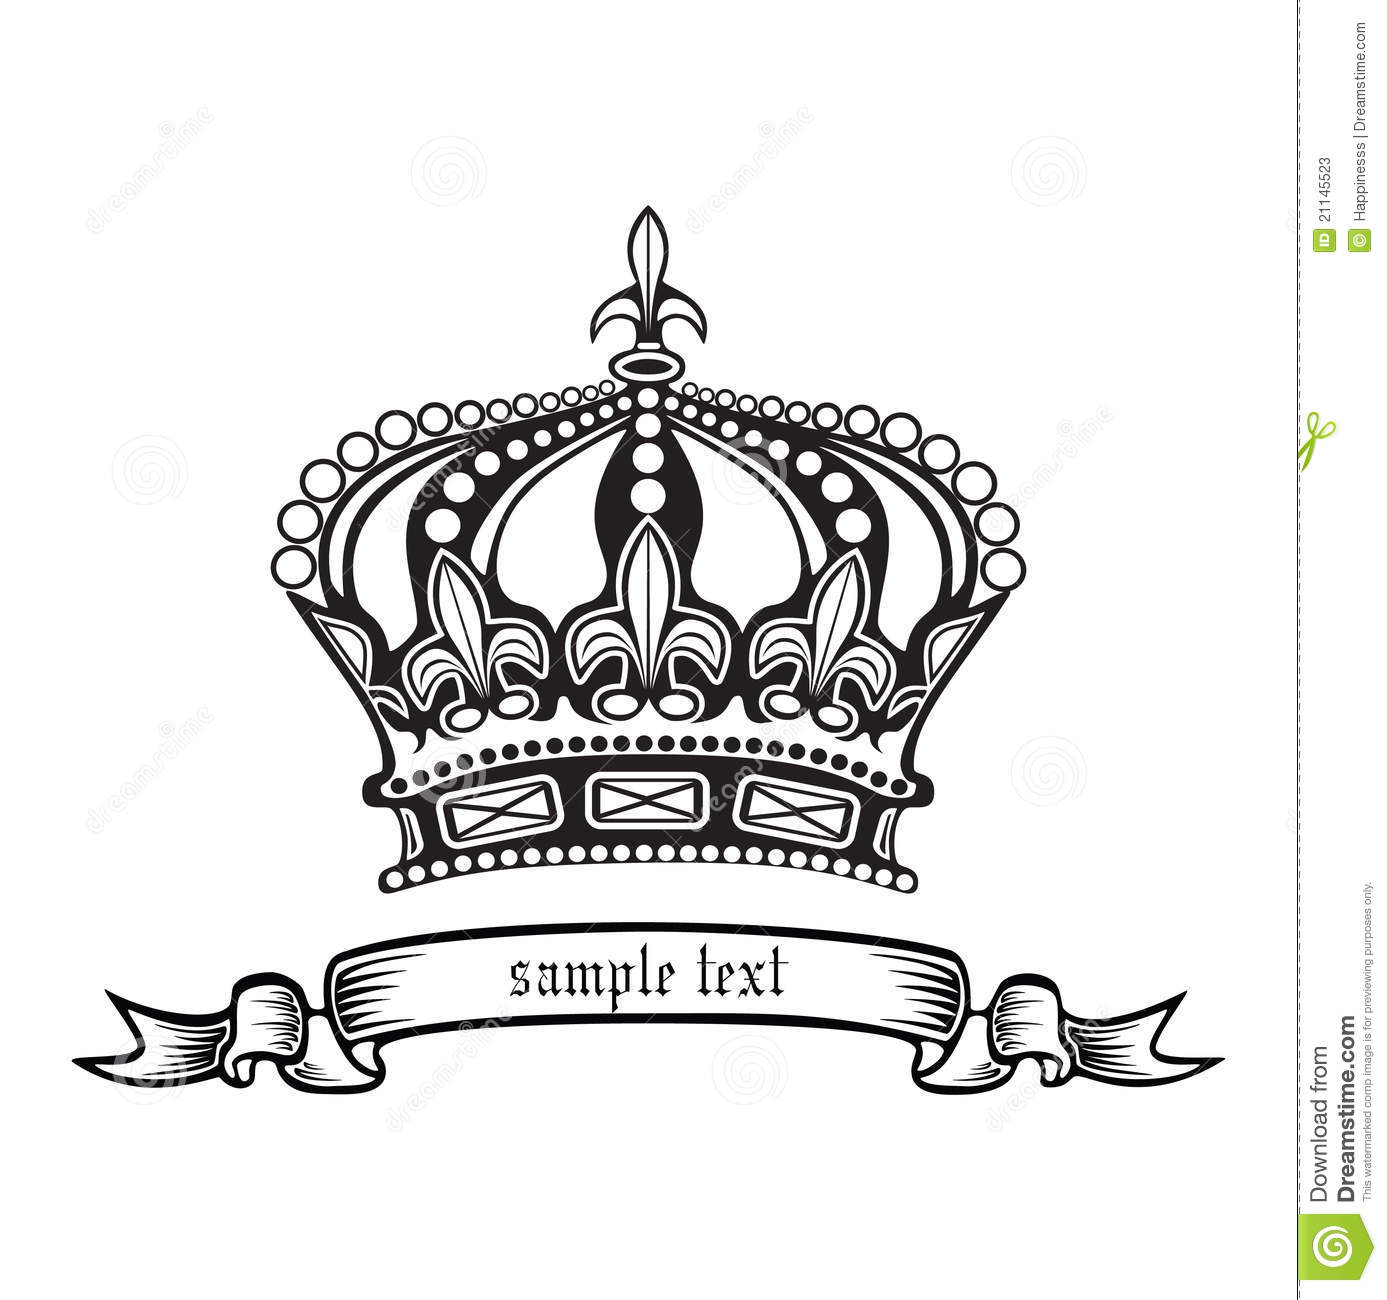 Black and White Vector Crown